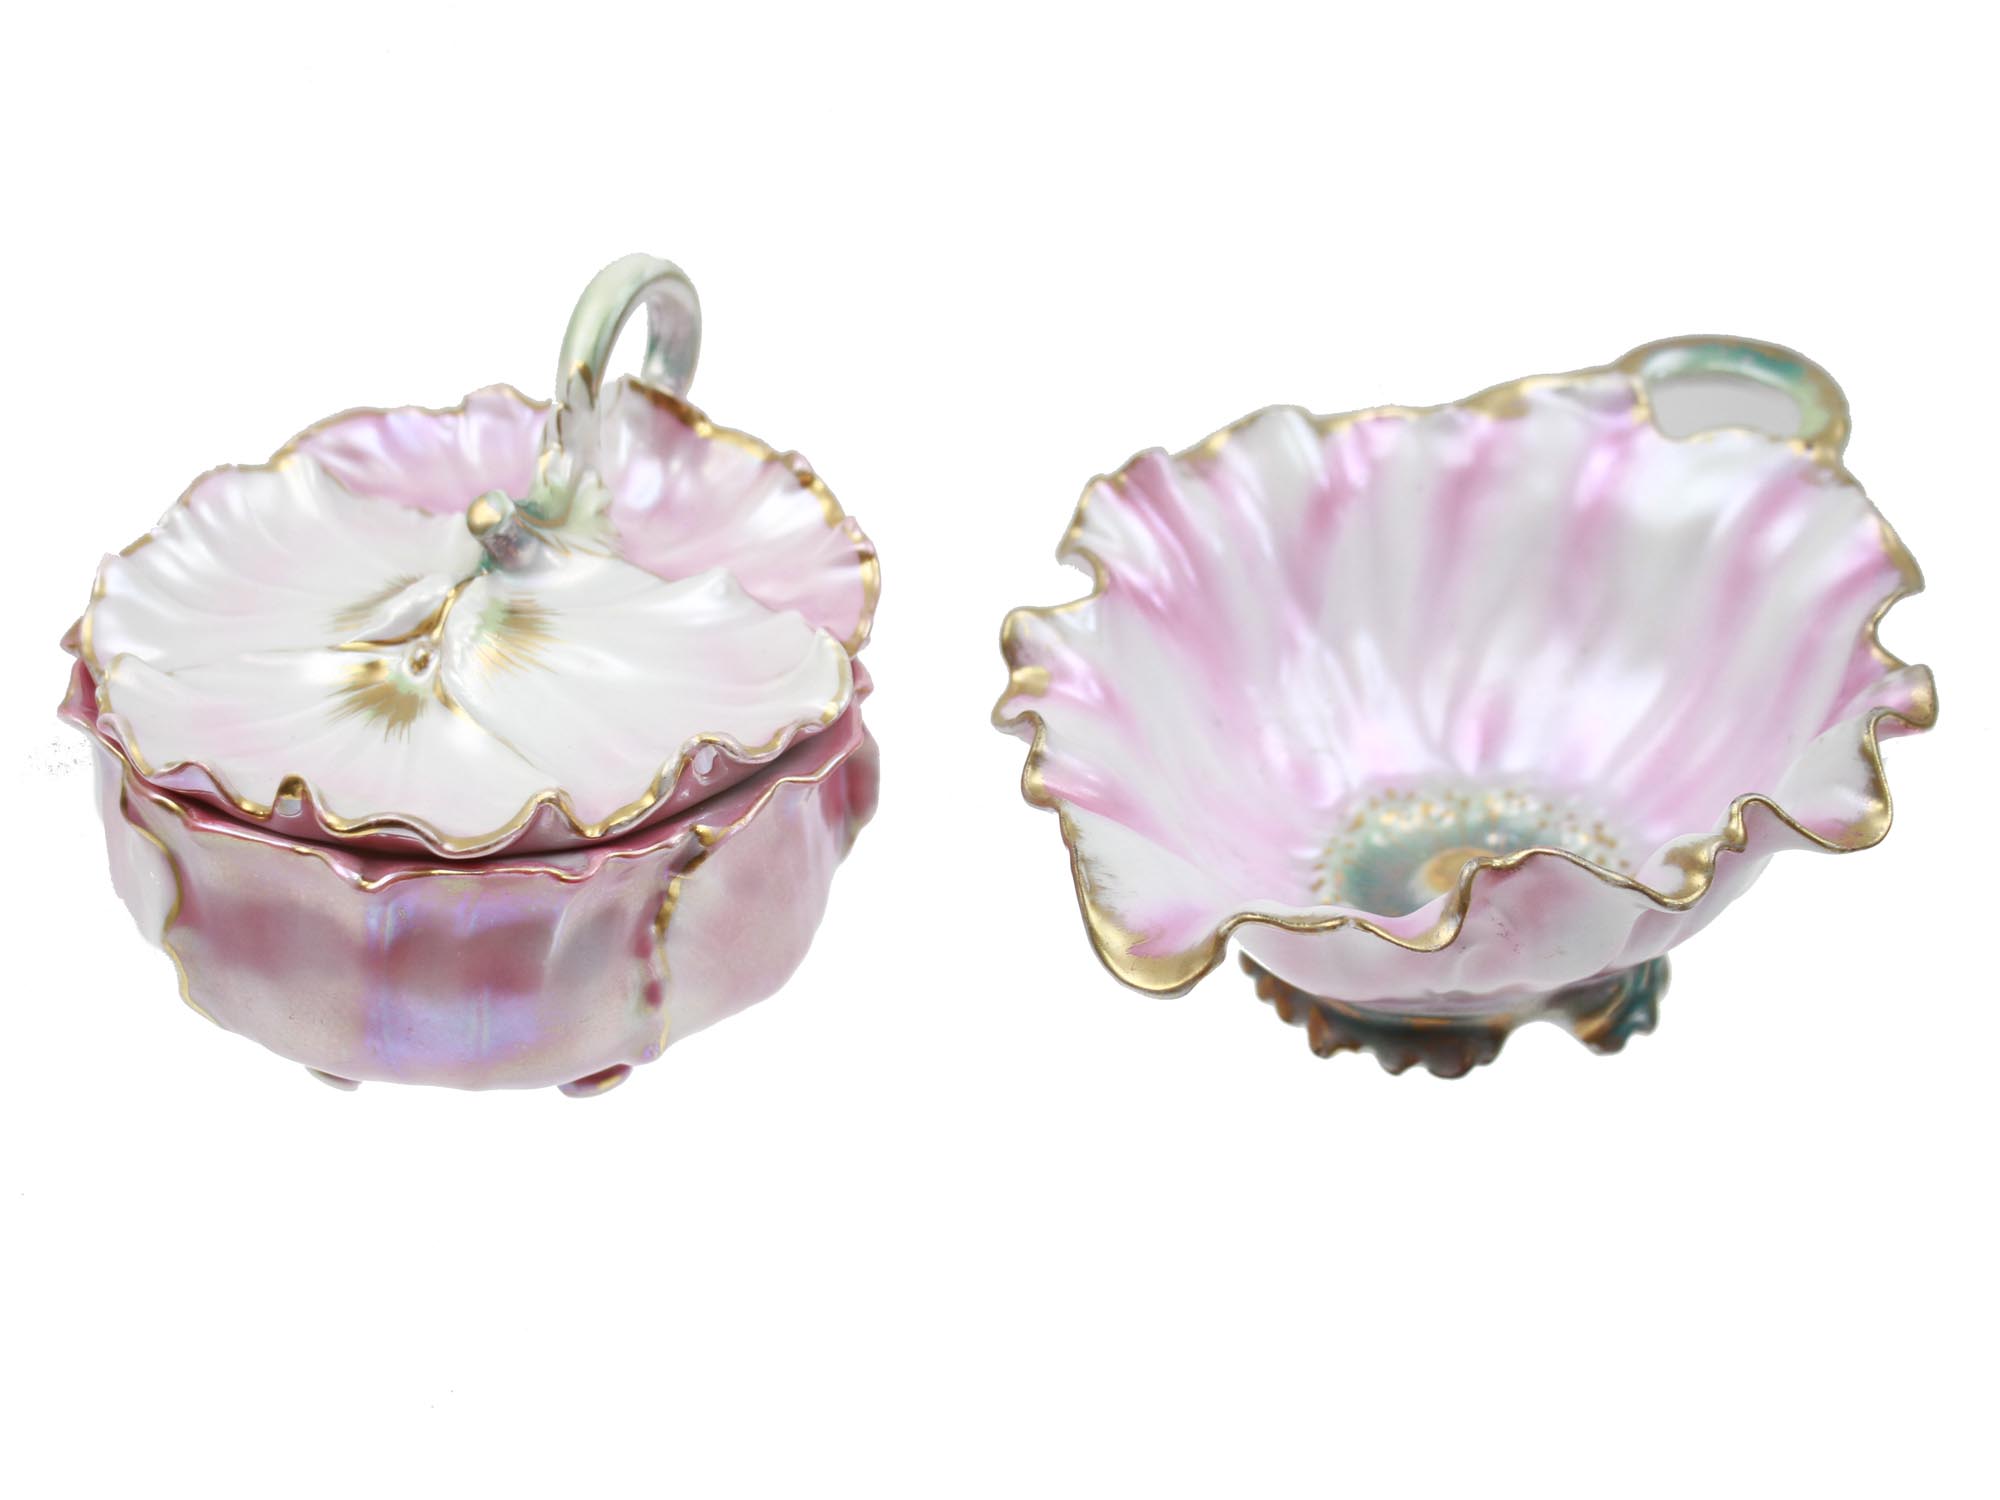 SET OF TWO ROYAL BAYREUTH PORCELAIN POPPY PIECES PIC-0